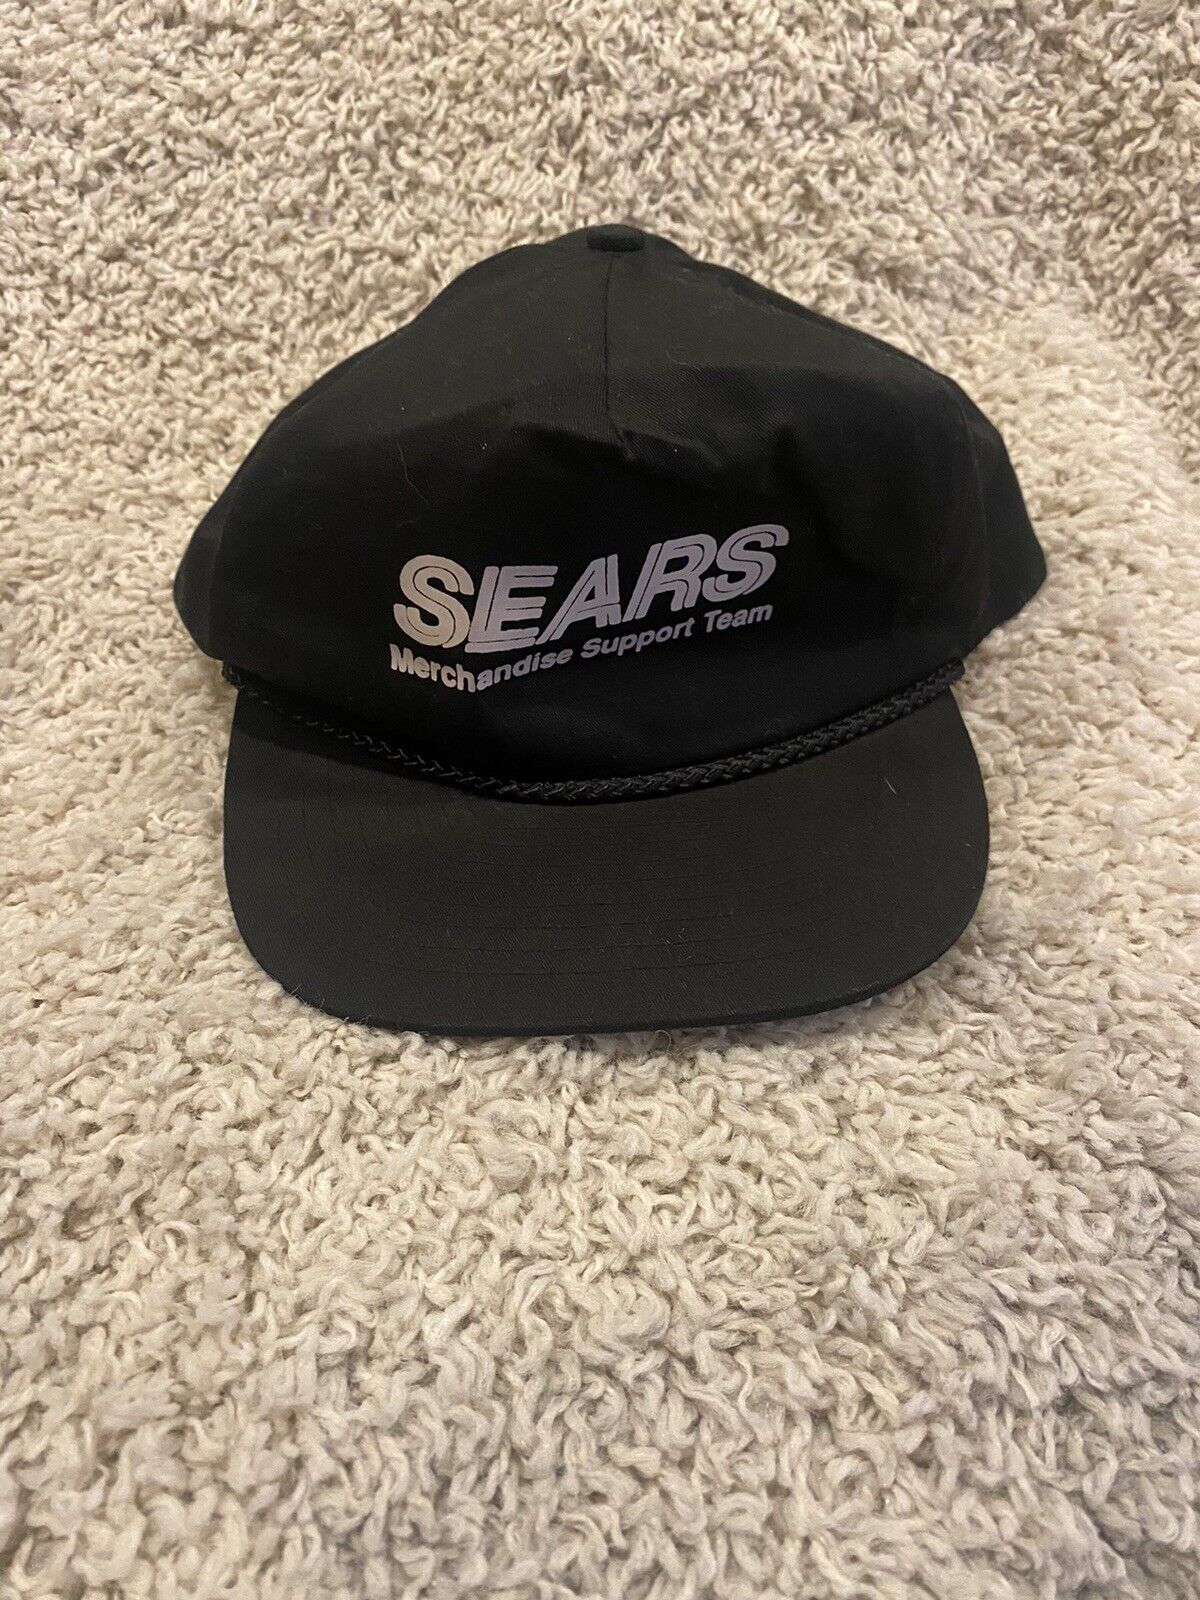 Vintage Sears Hat Cap SnapBack Adult One Size Black Home Central Casual Mens ***